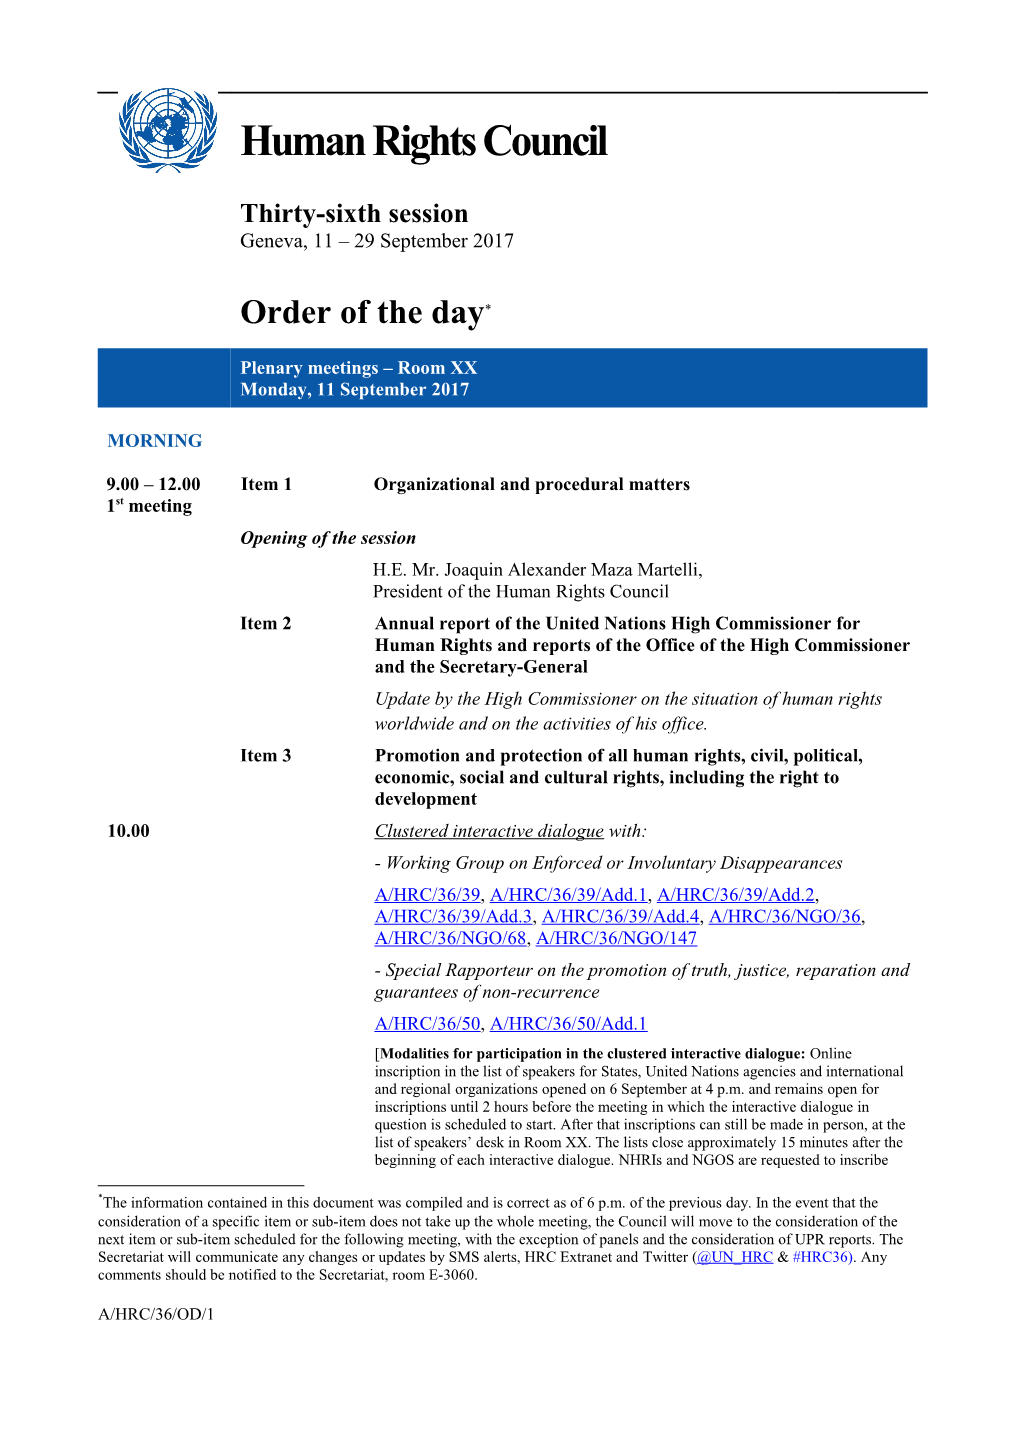 Monday, 11 September, Order of the Day in English